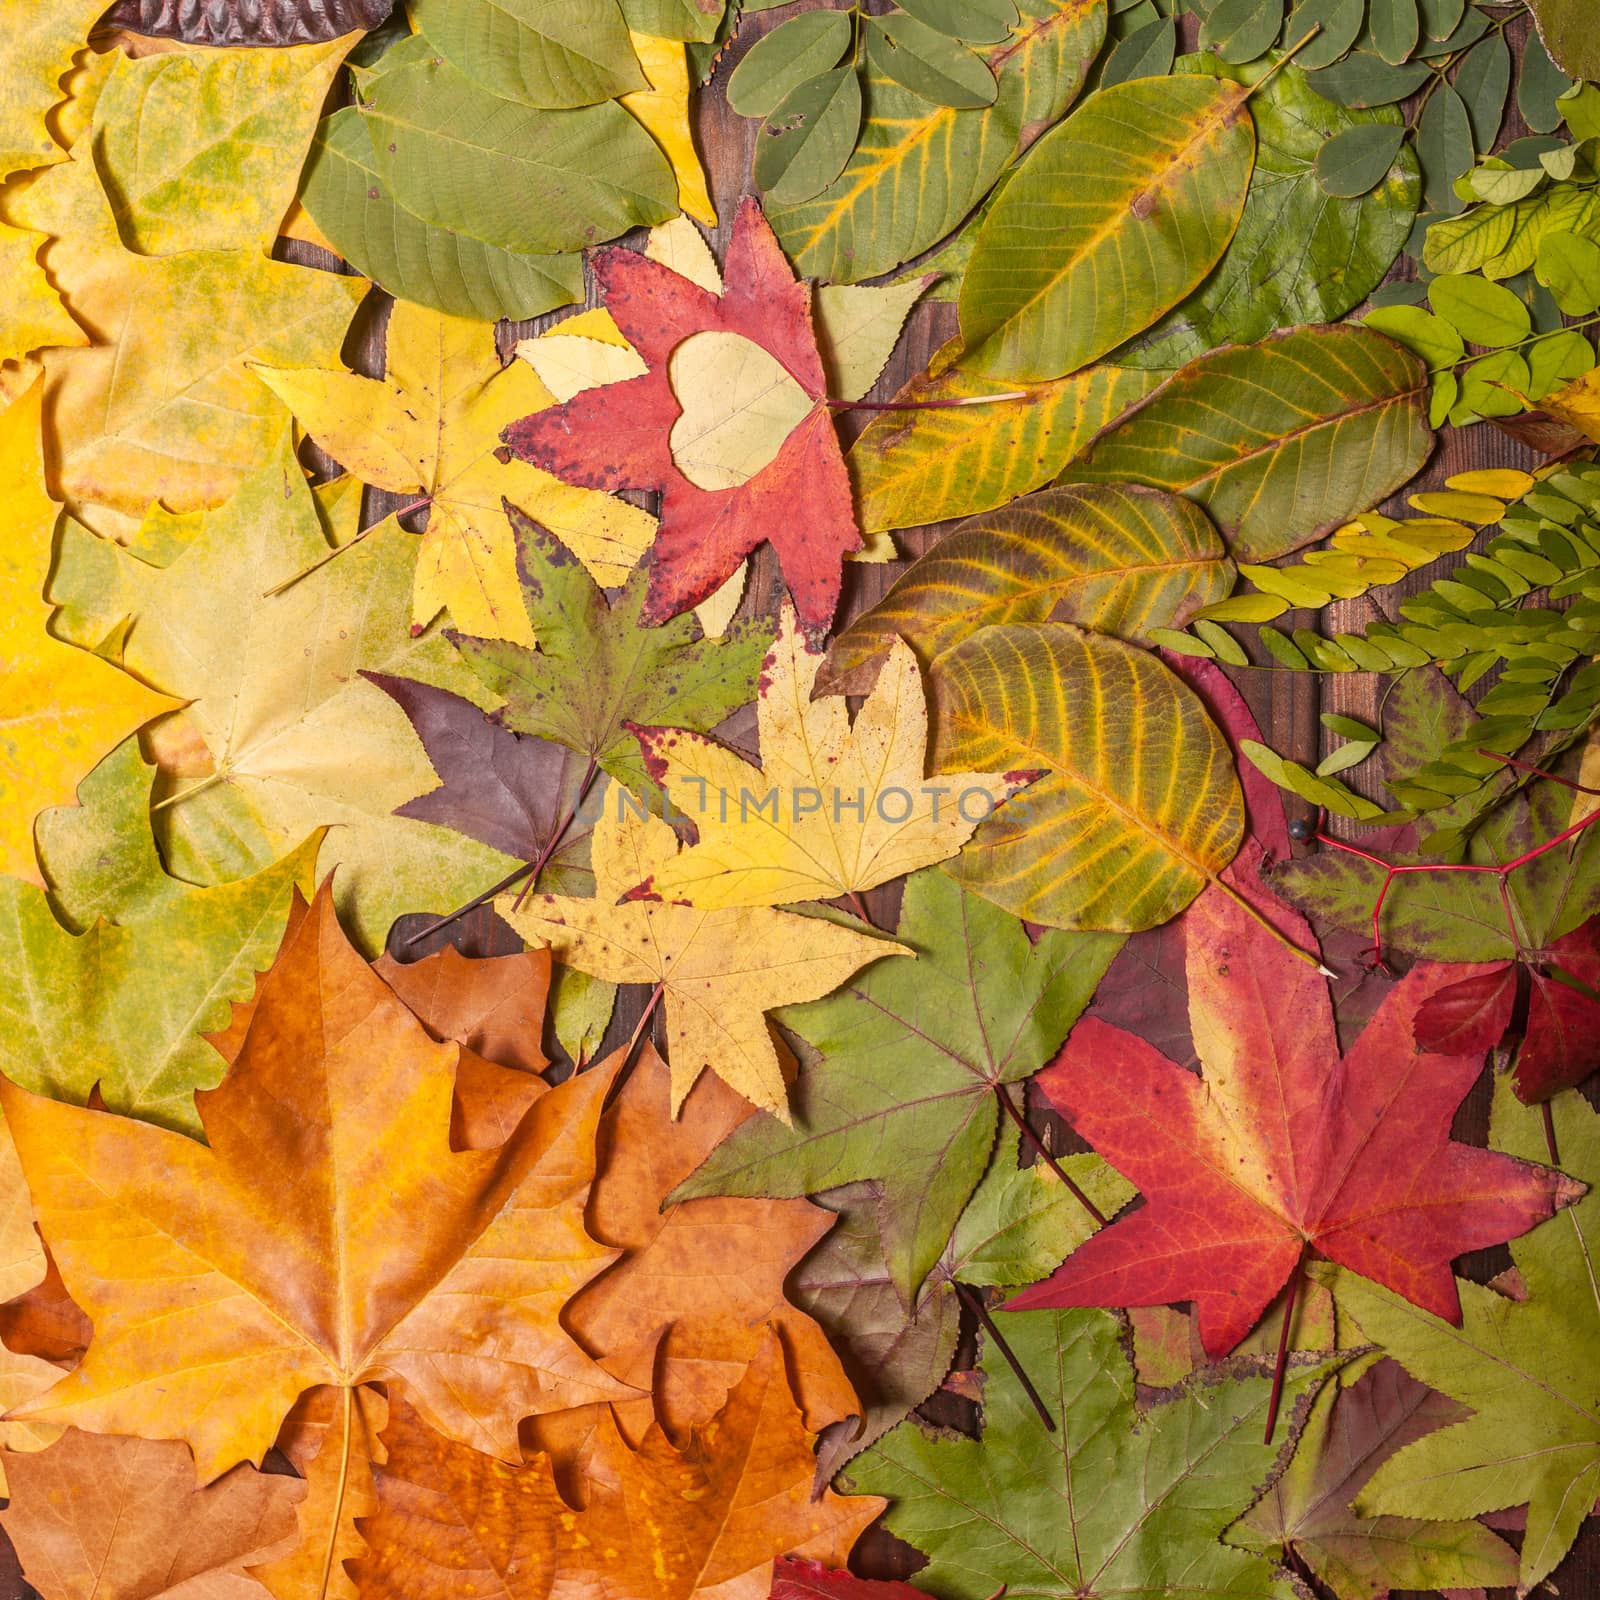 Autumn Leaves over old wooden background by IxMaster